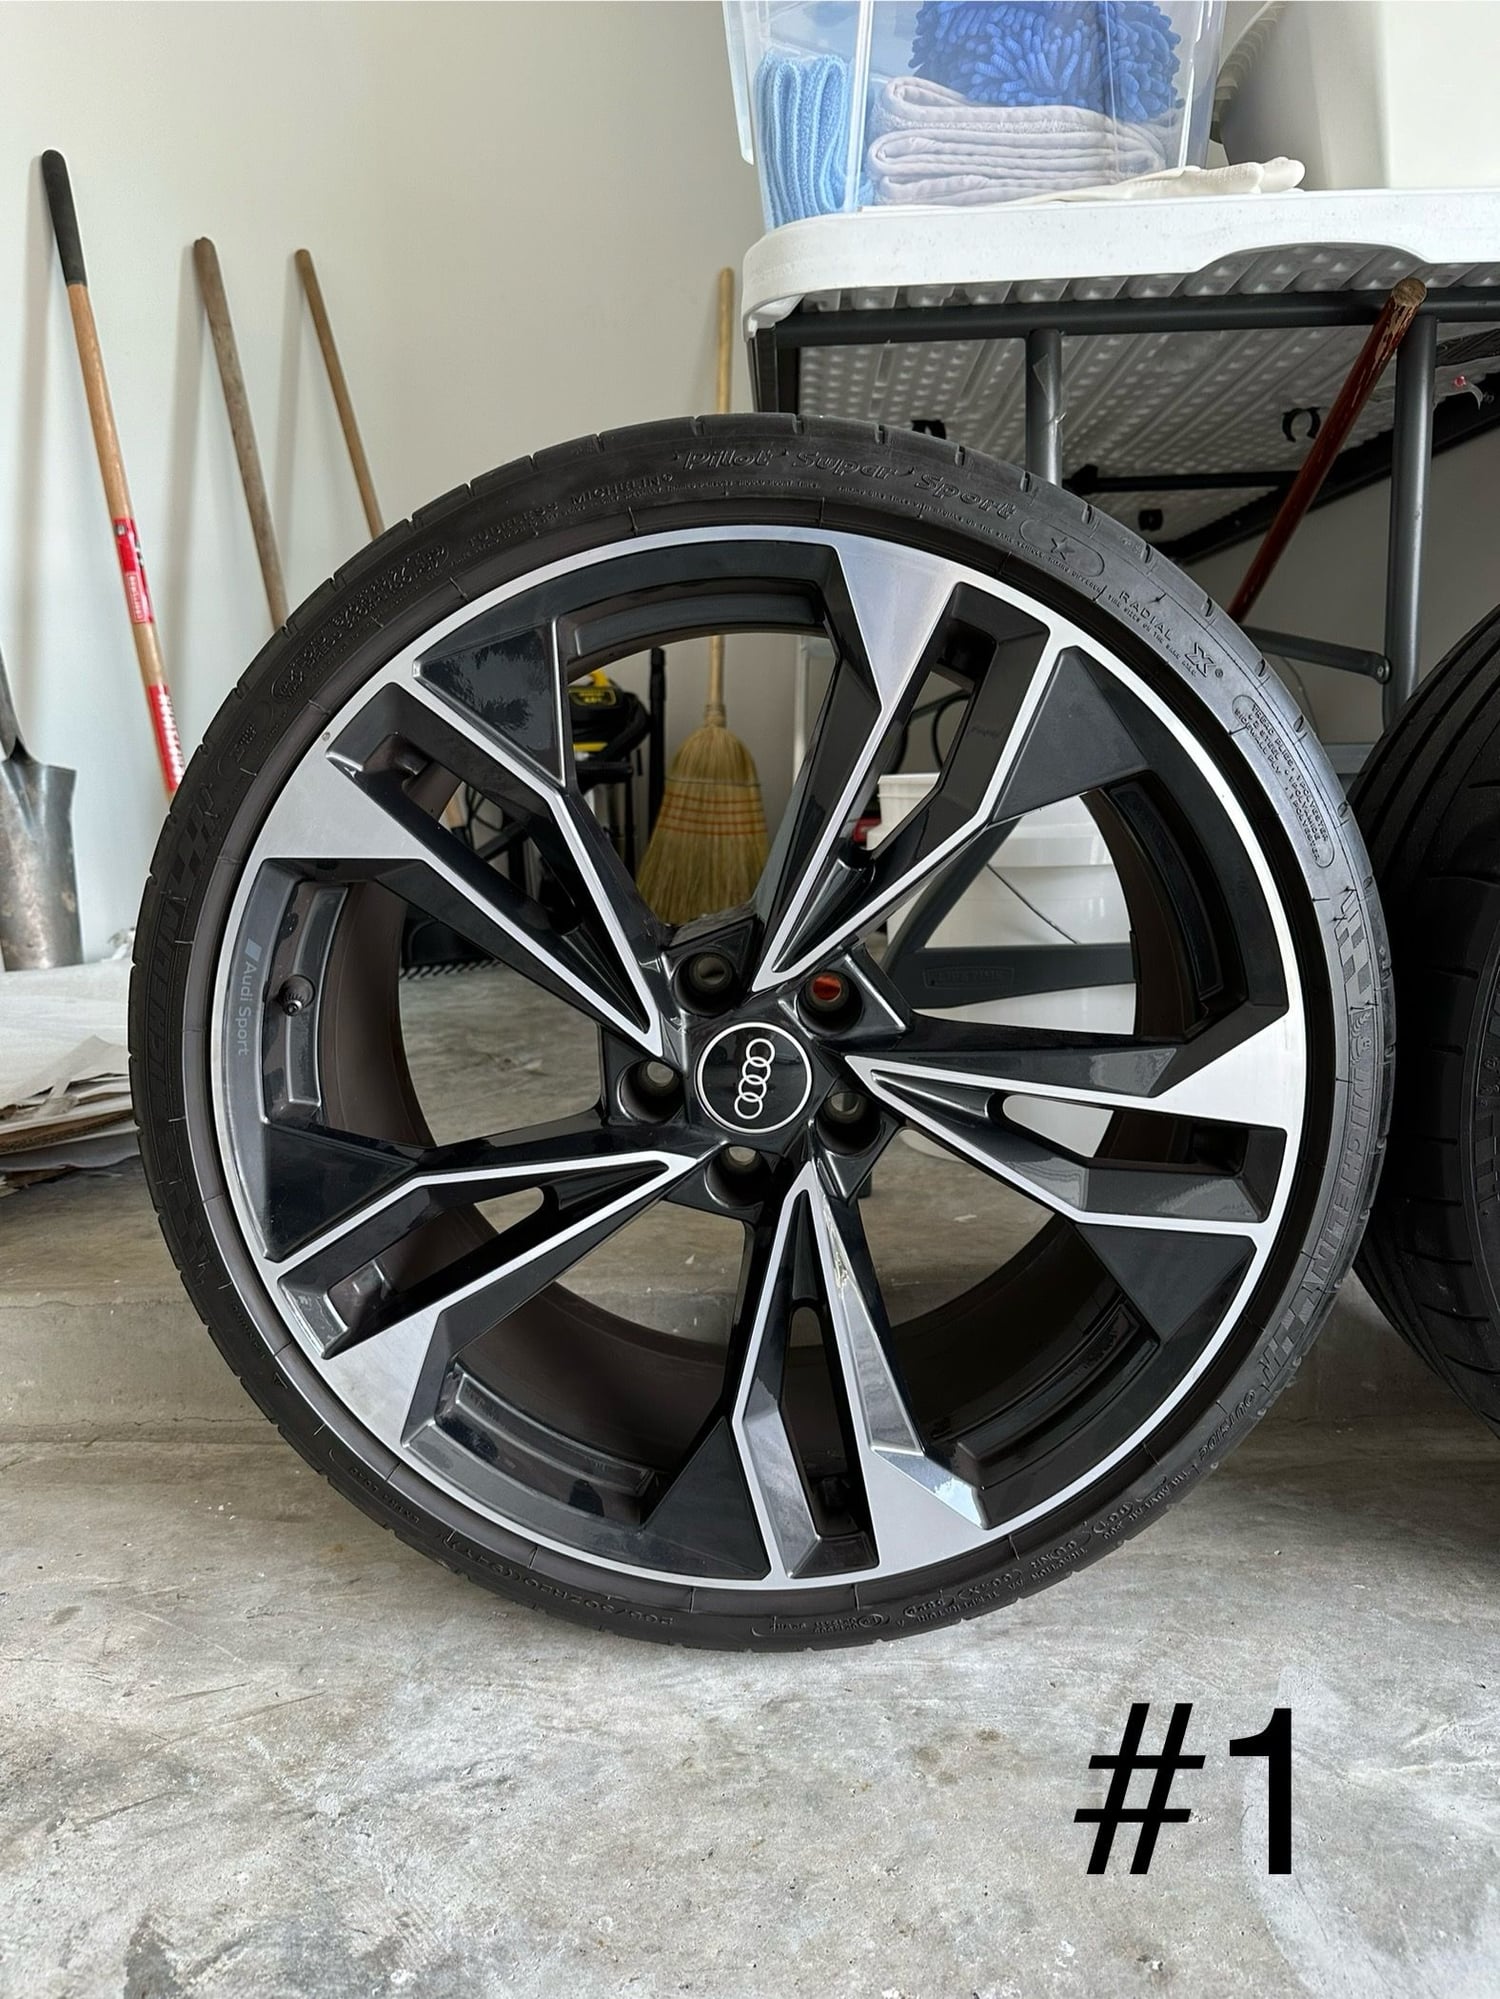 Wheels and Tires/Axles - Audi S5 Black Optics 20" wheels with Michelin Pilot Super Sport tires - Used - 2018 to 2024 Audi S5 - 2018 to 2024 Audi A5 - 2018 to 2024 Audi S5 Sportback - Houston, TX 77346, United States